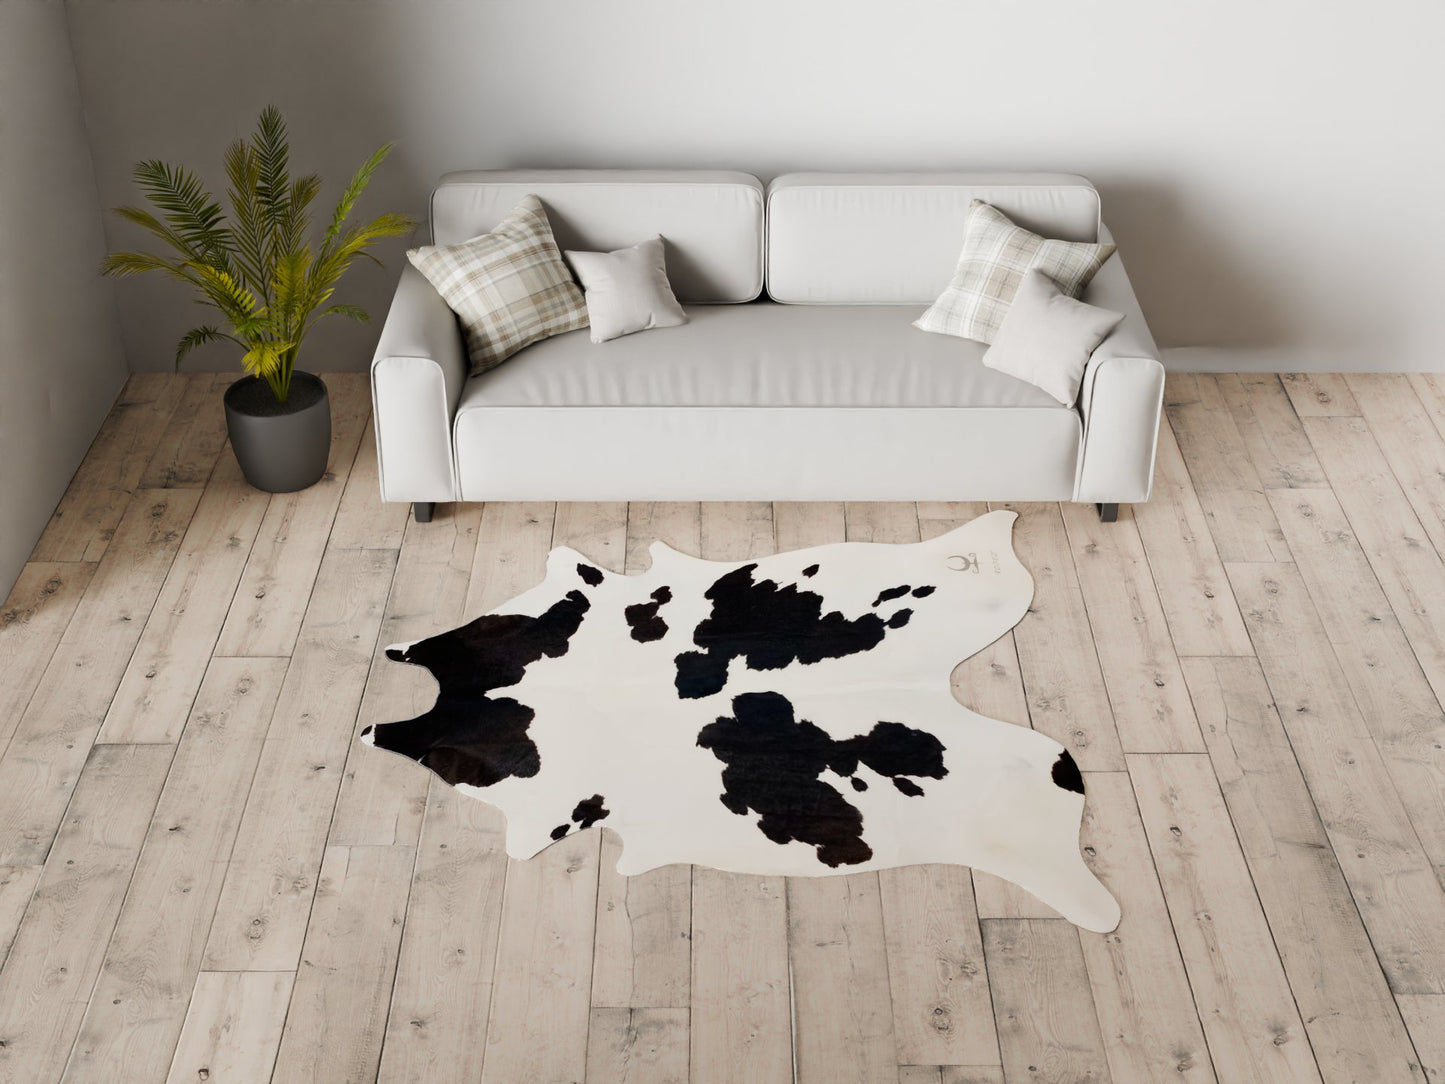 Black and White Cowhide Rug Size 6.6x6 ft---4673 - Rodeo Cowhide Rugs